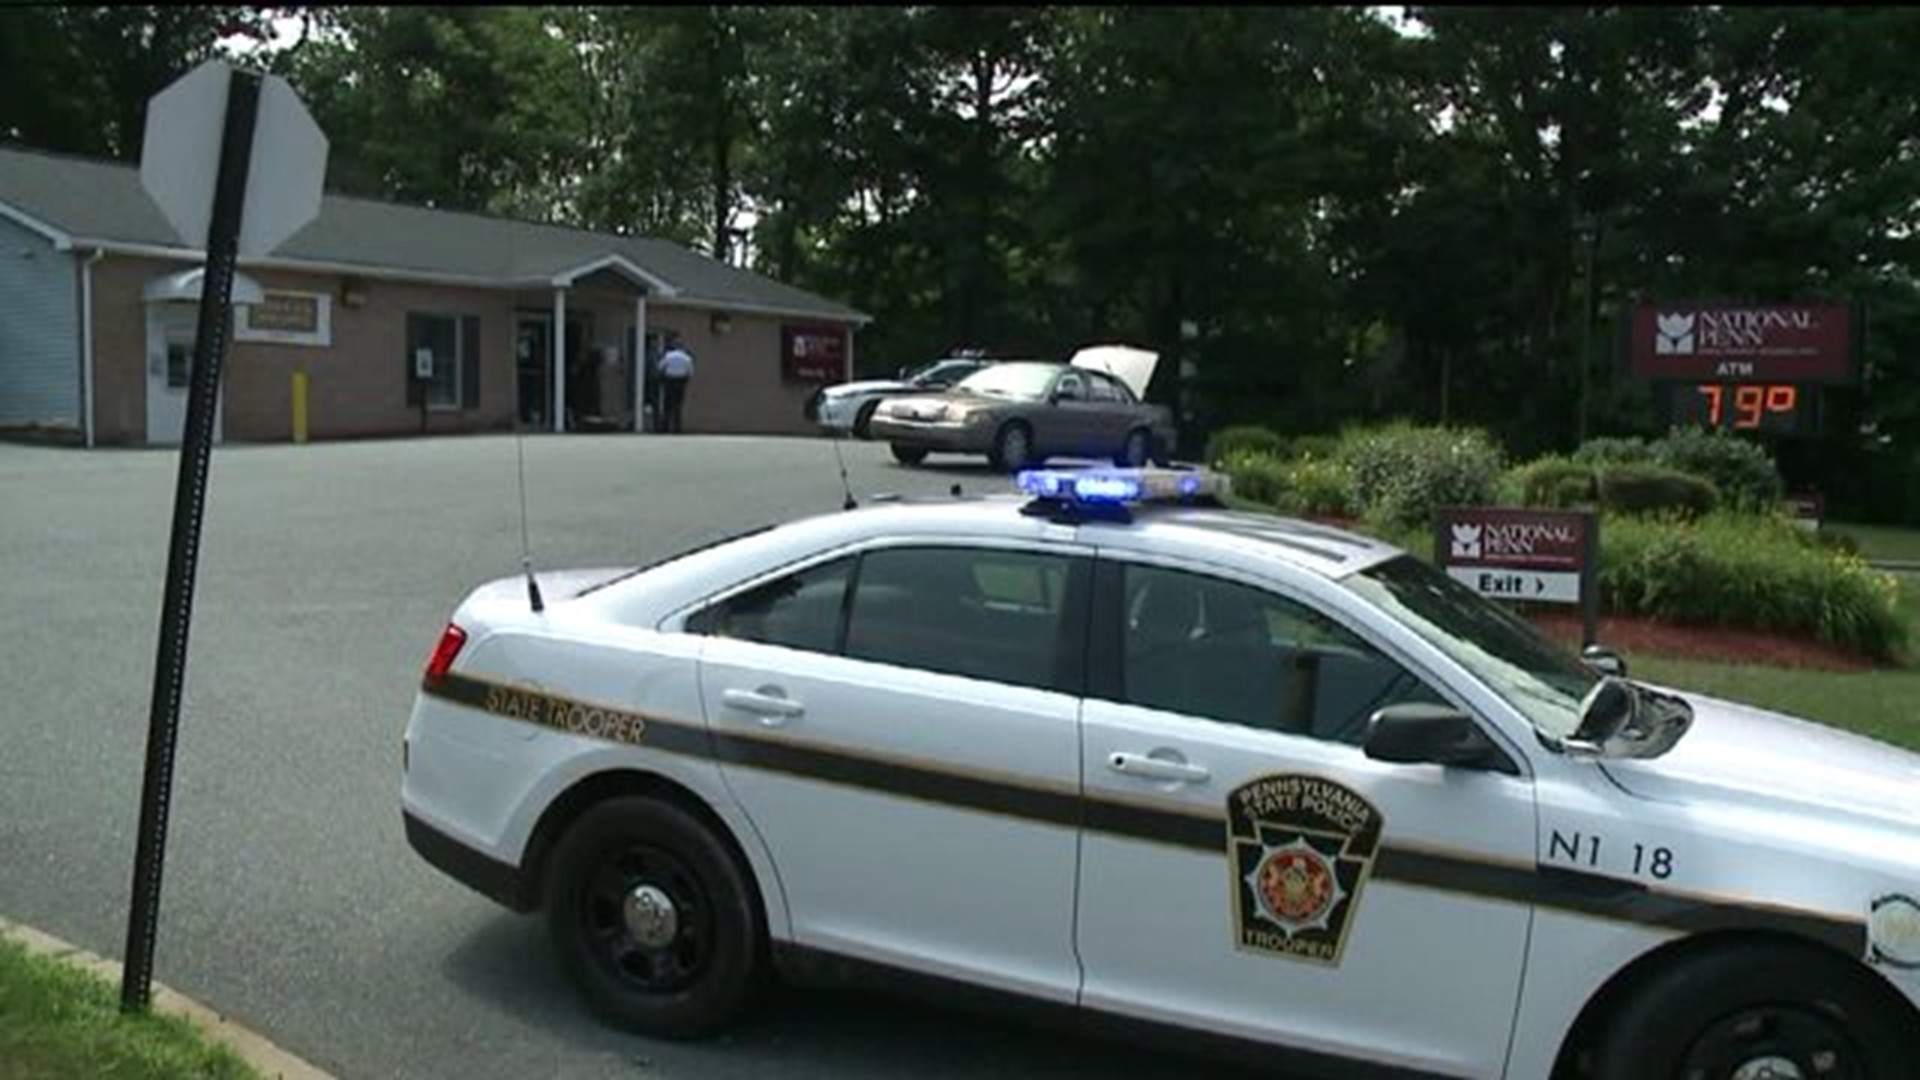 Search For Bank Robber In Luzerne County